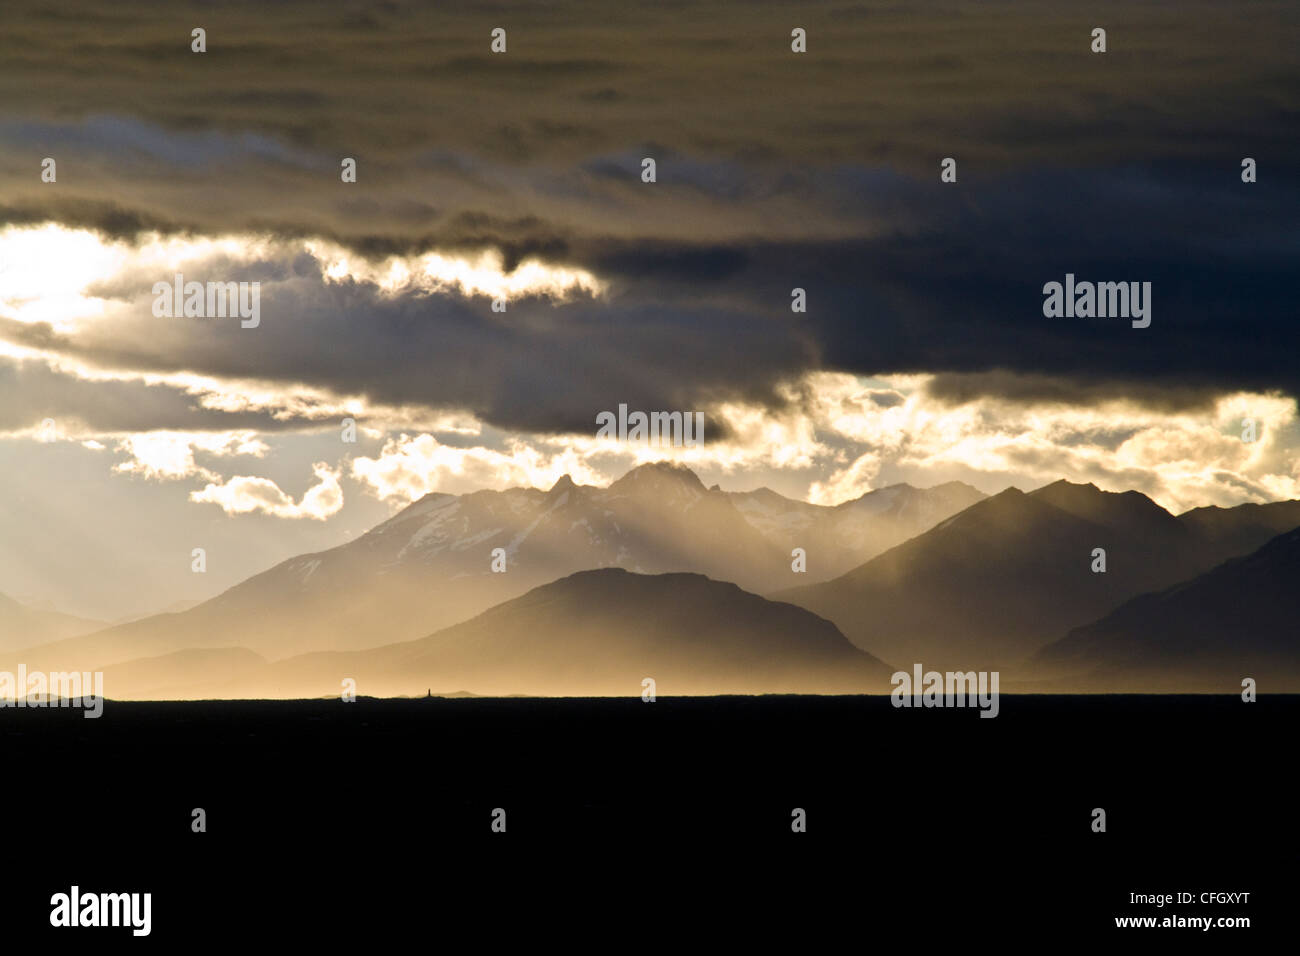 A sunset storm over the Andes turns sea mist and clouds golden. Stock Photo